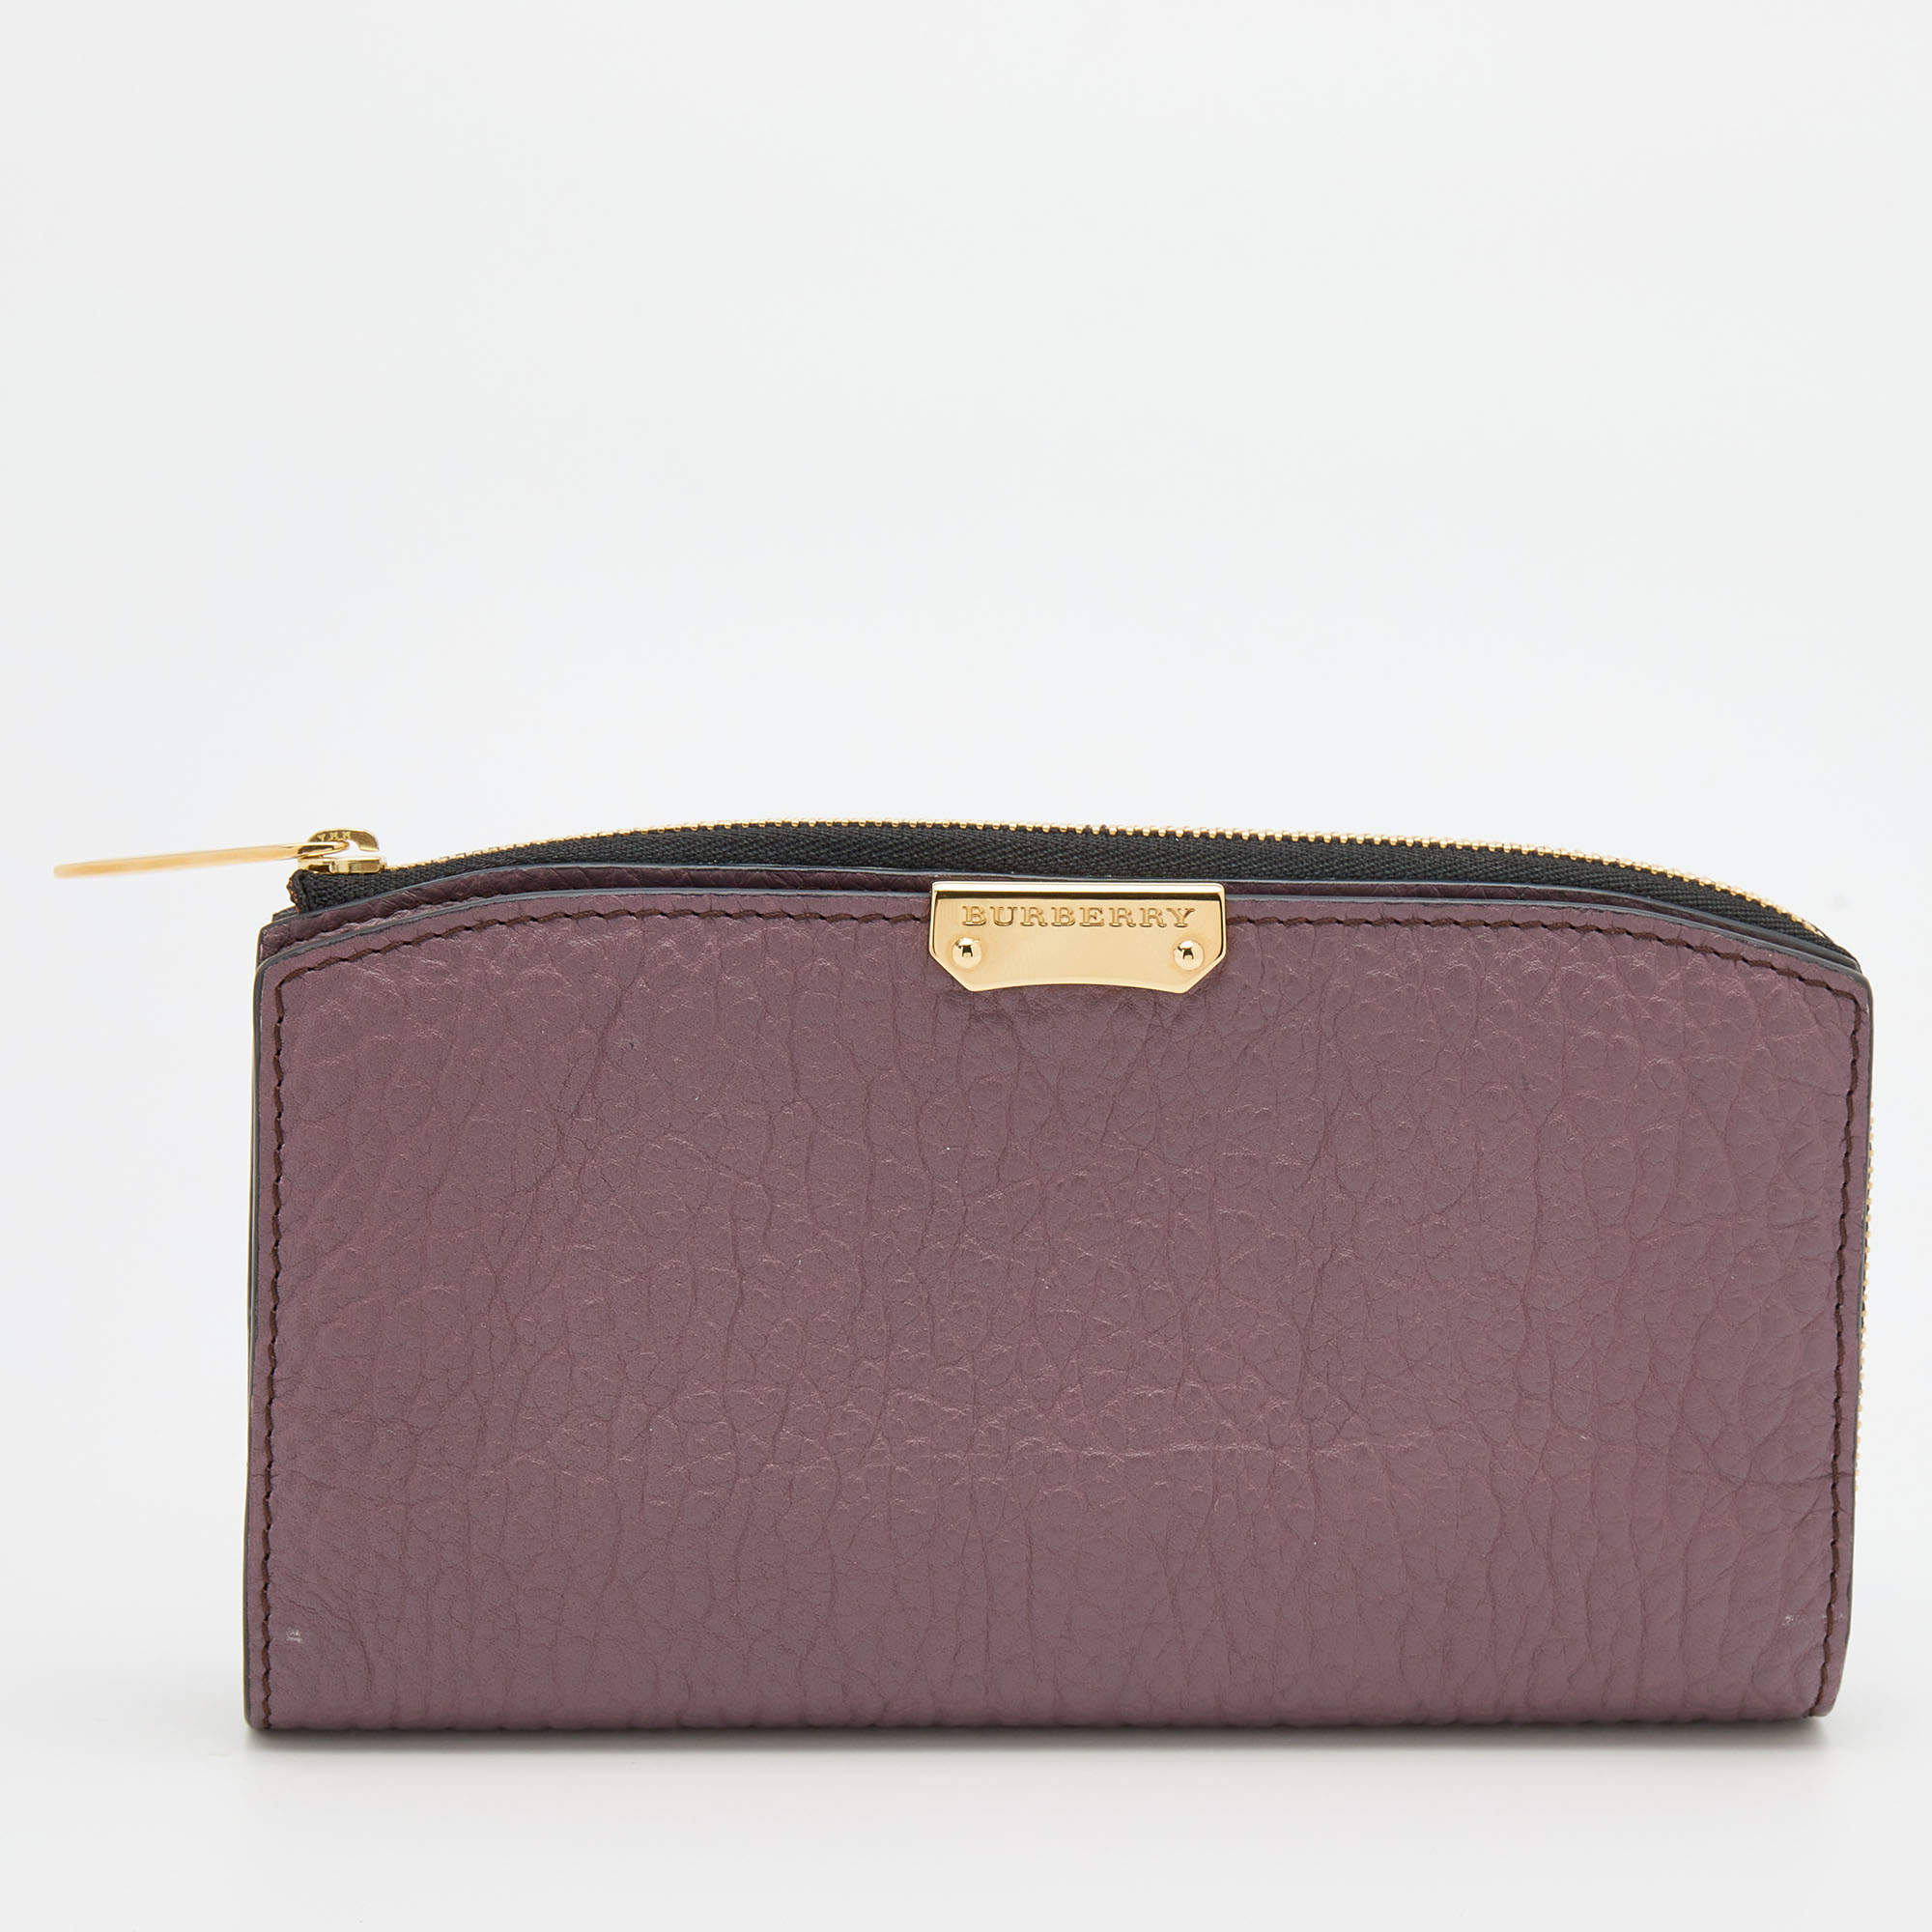 Burberry Purple Textured Leather Zip Around Compact Wallet Burberry | TLC